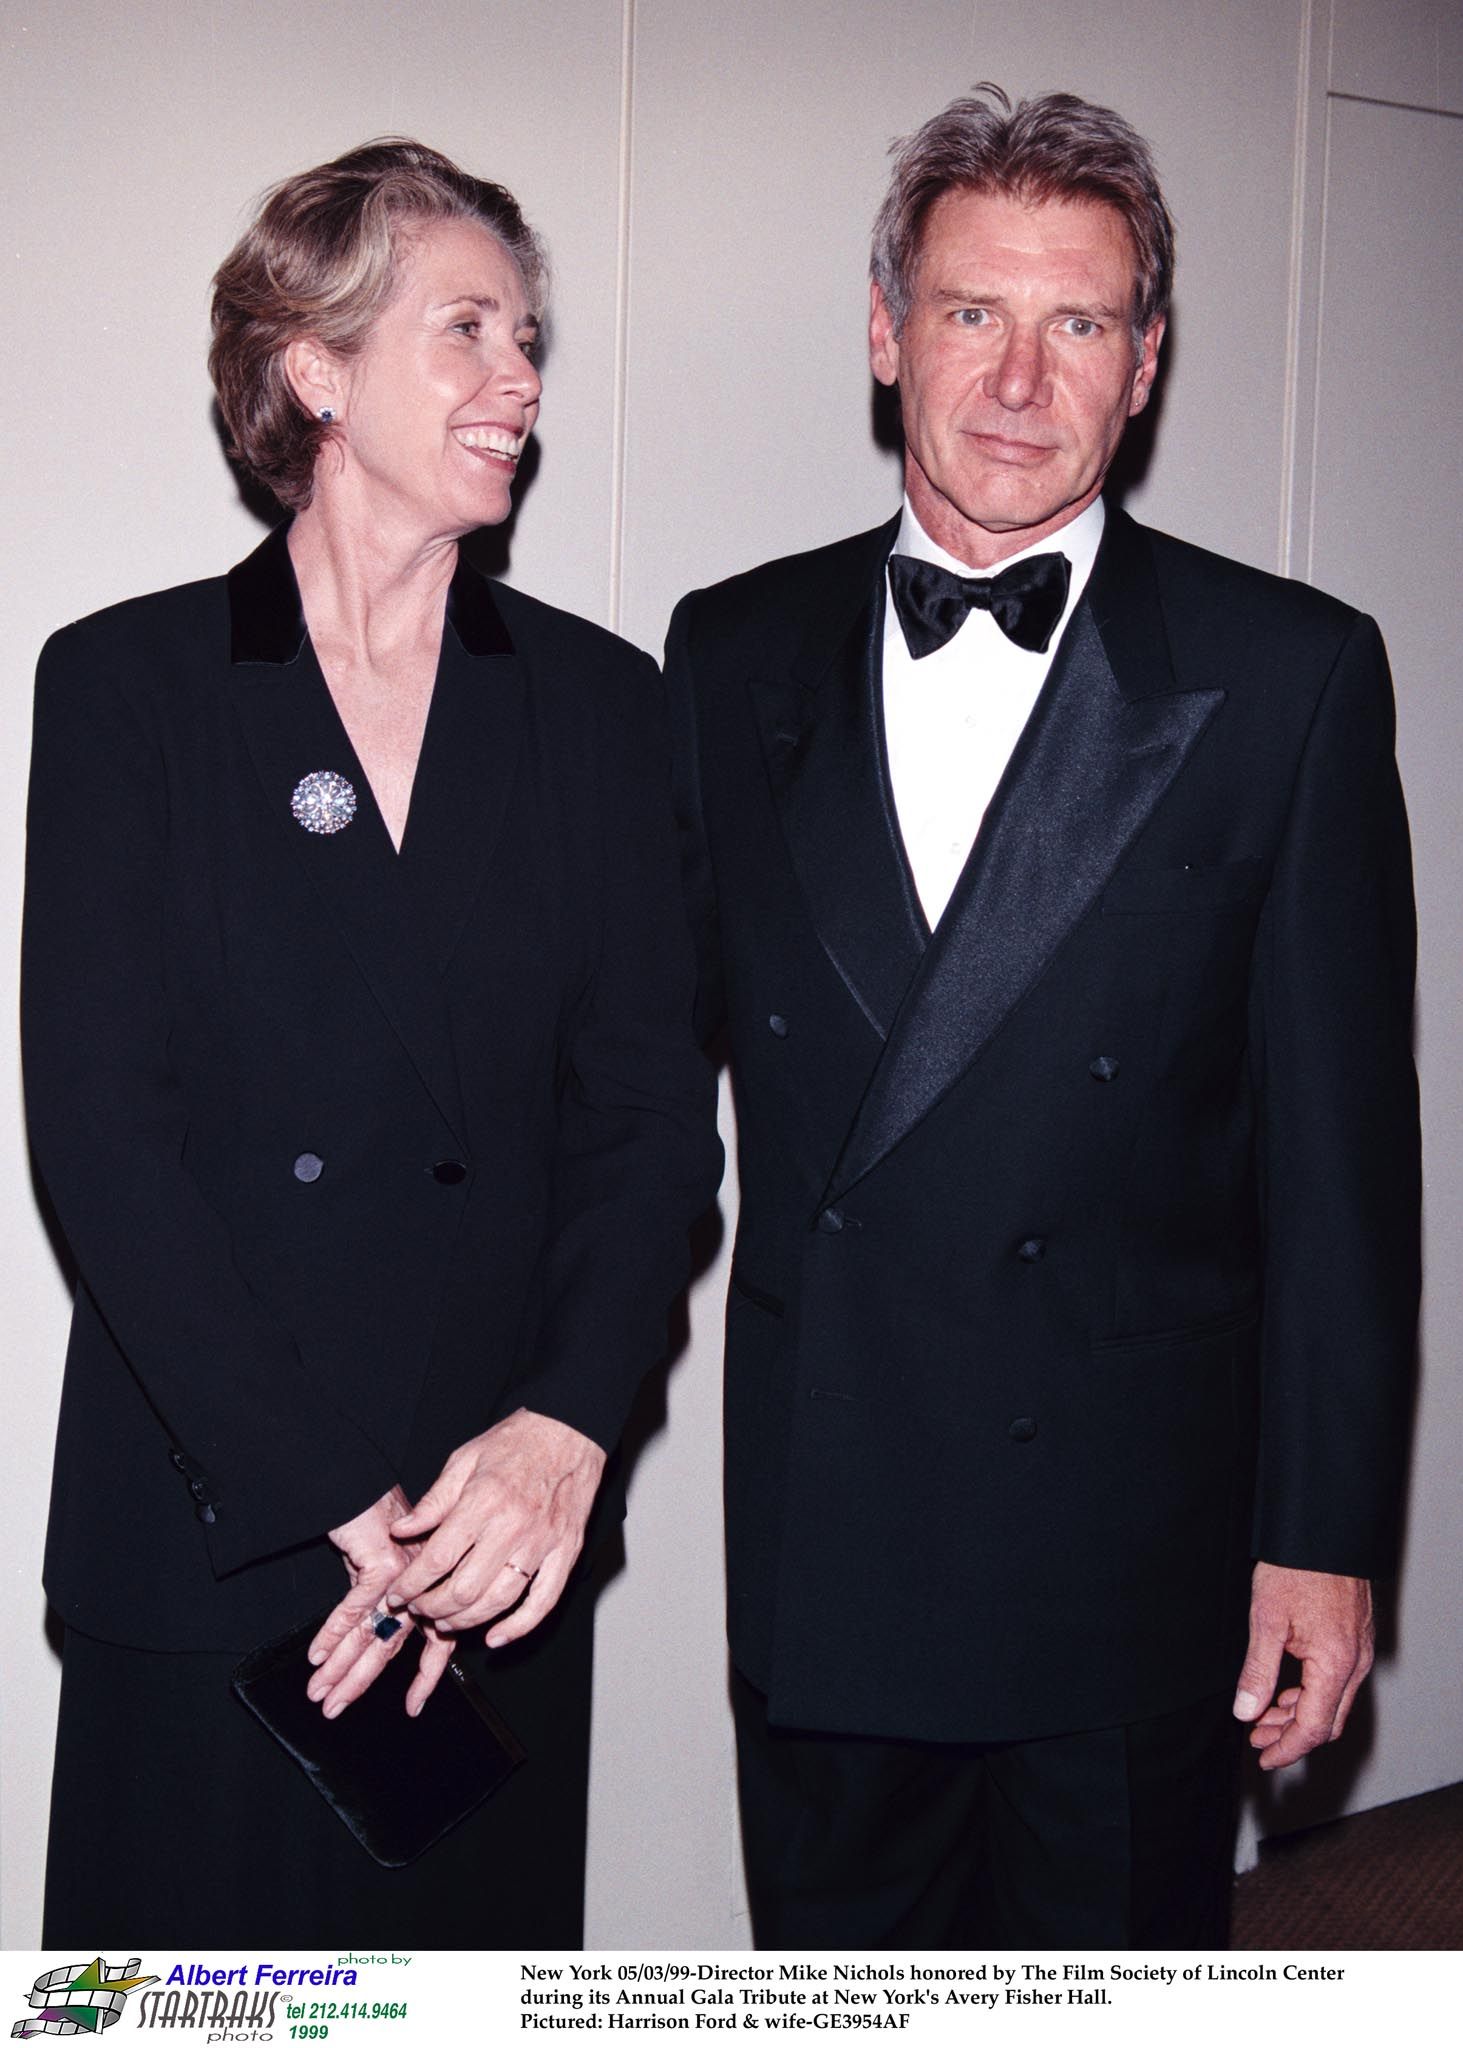 How expensive was Harrison Ford & Melissa Mathison's divorce?